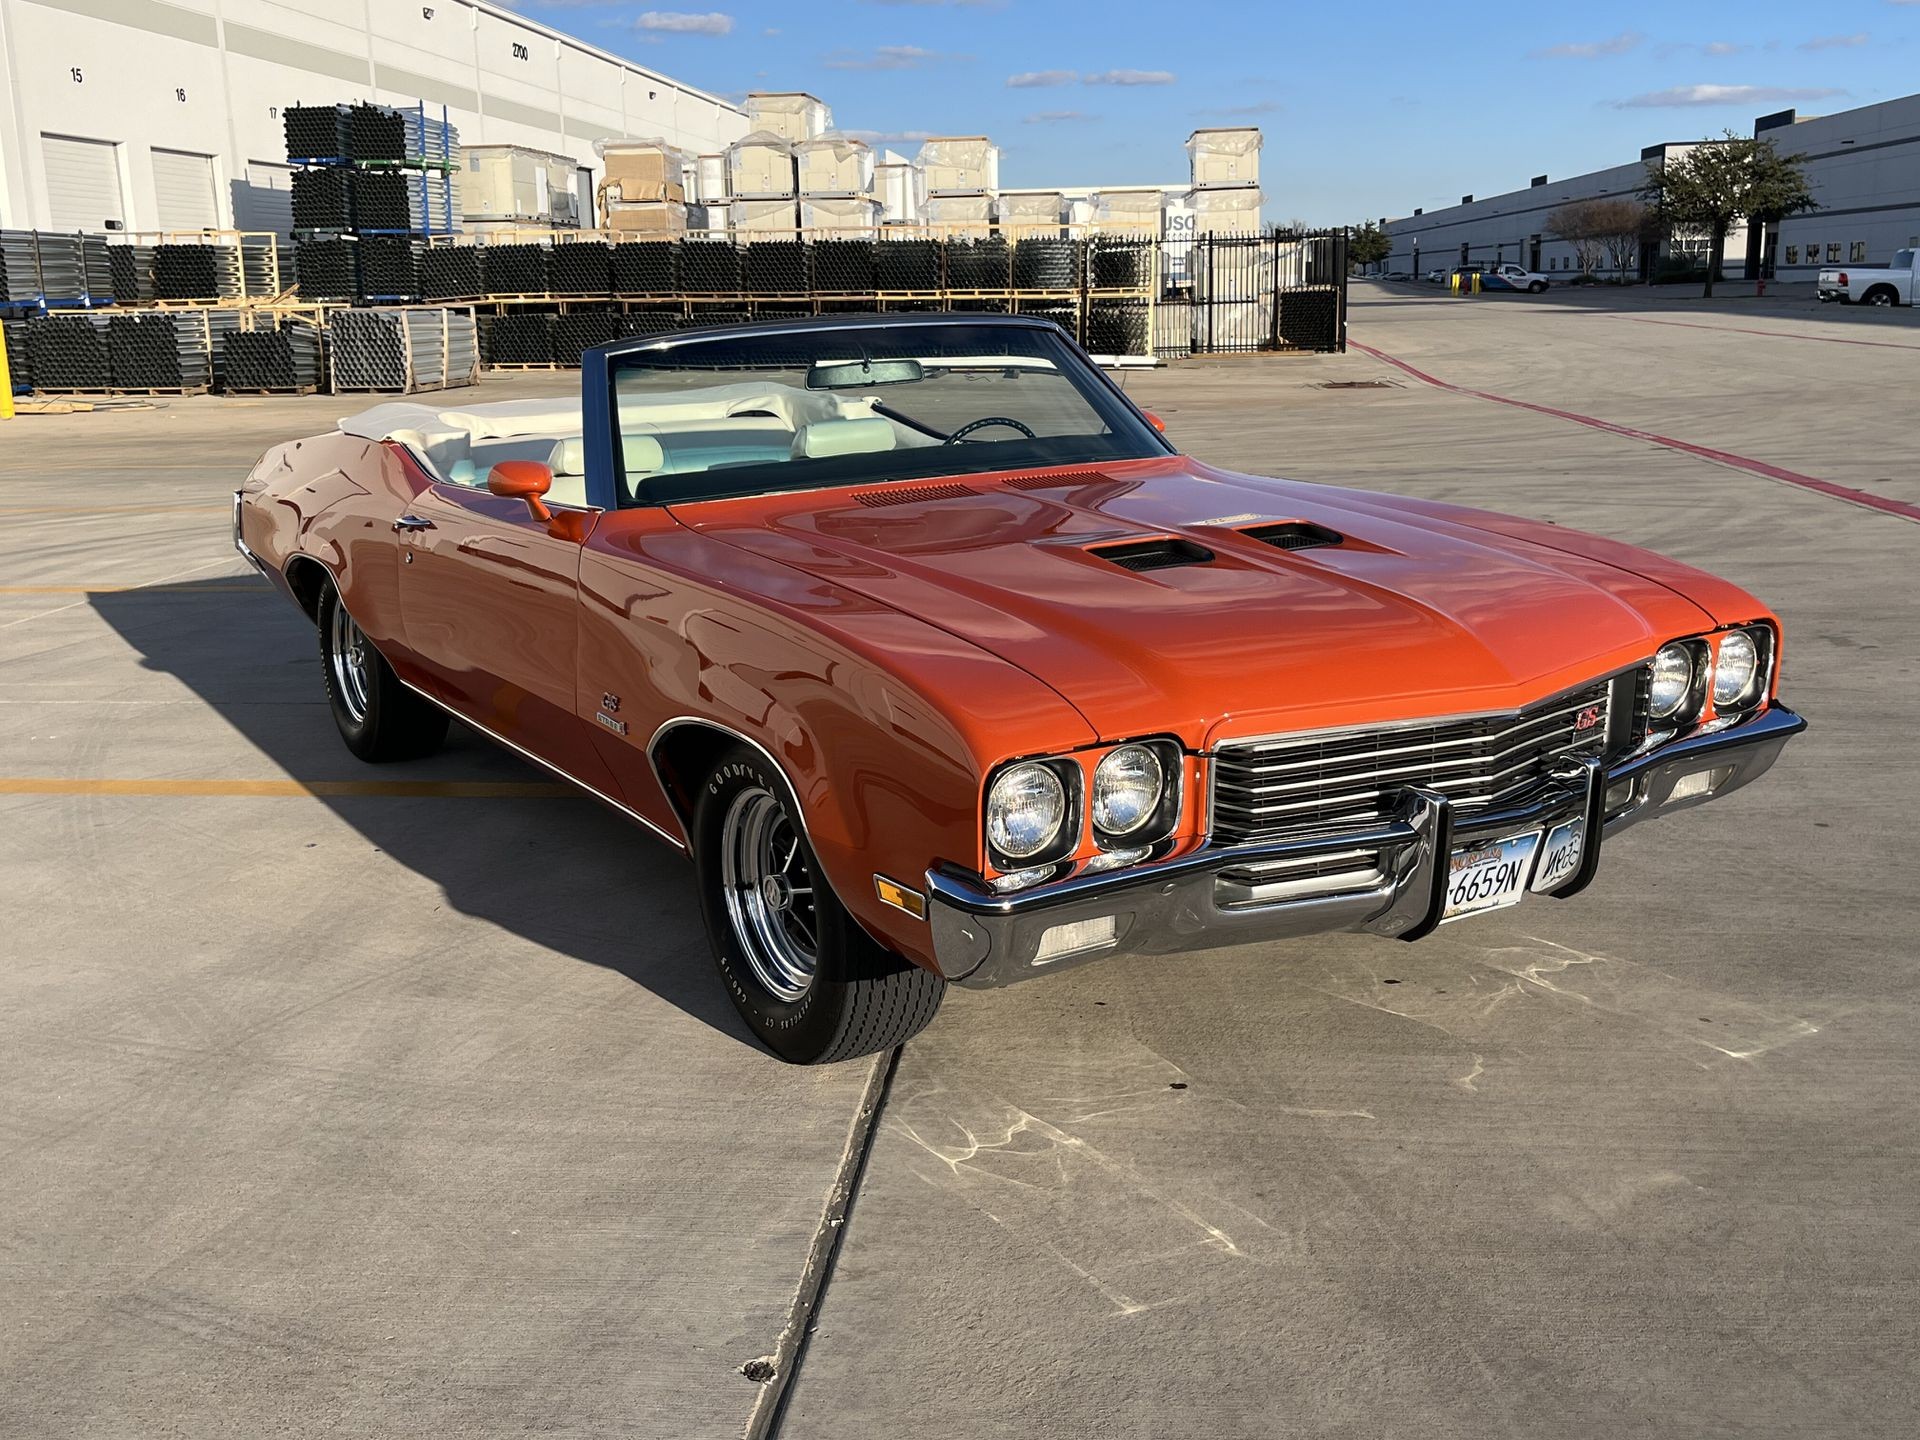 Hemmings Auctions Results: GS455, Rogue, Chevelle SS396, Mustang, Camaro SS and Challenger